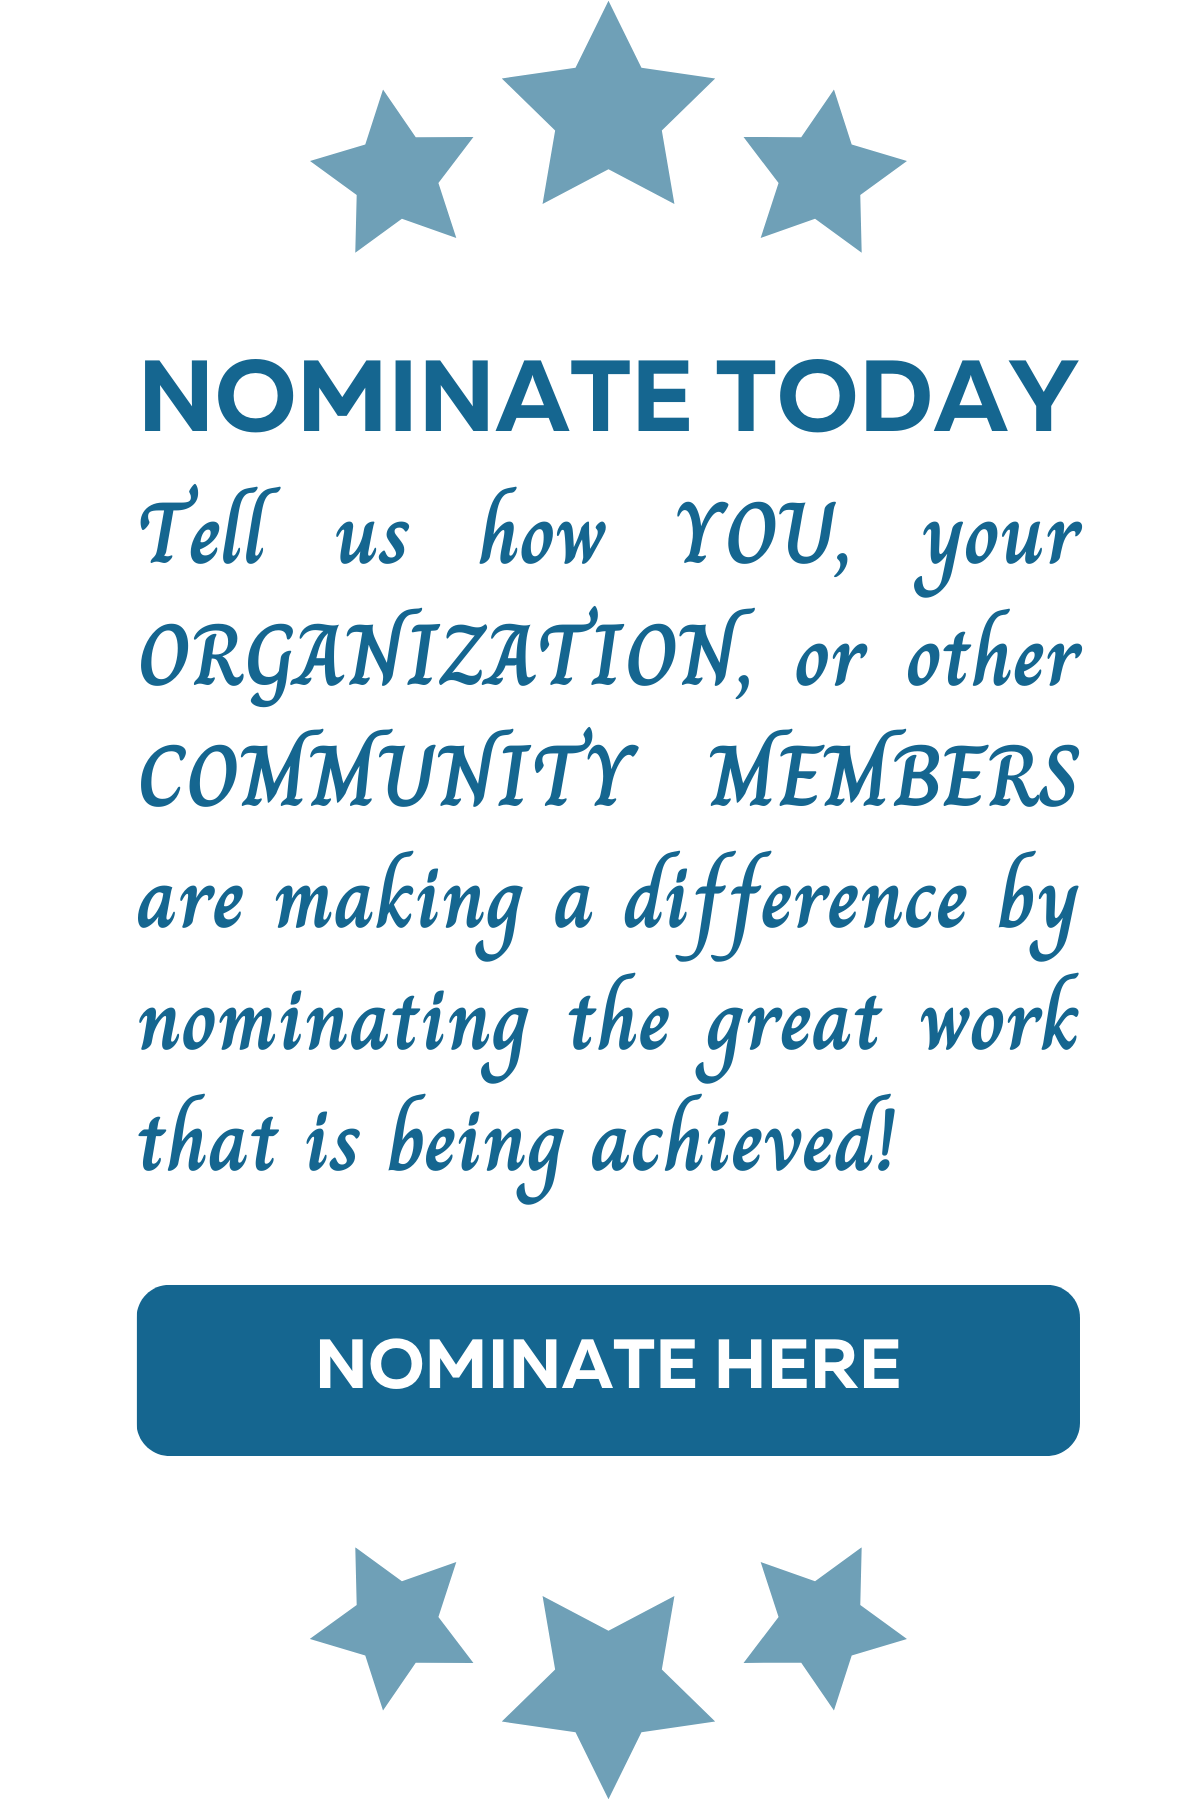 Tell us how YOU, your ORGANIZATION, or other COMMUNITY MEMBERS are making a difference by nominating the great work that is being achieved! Nominate here